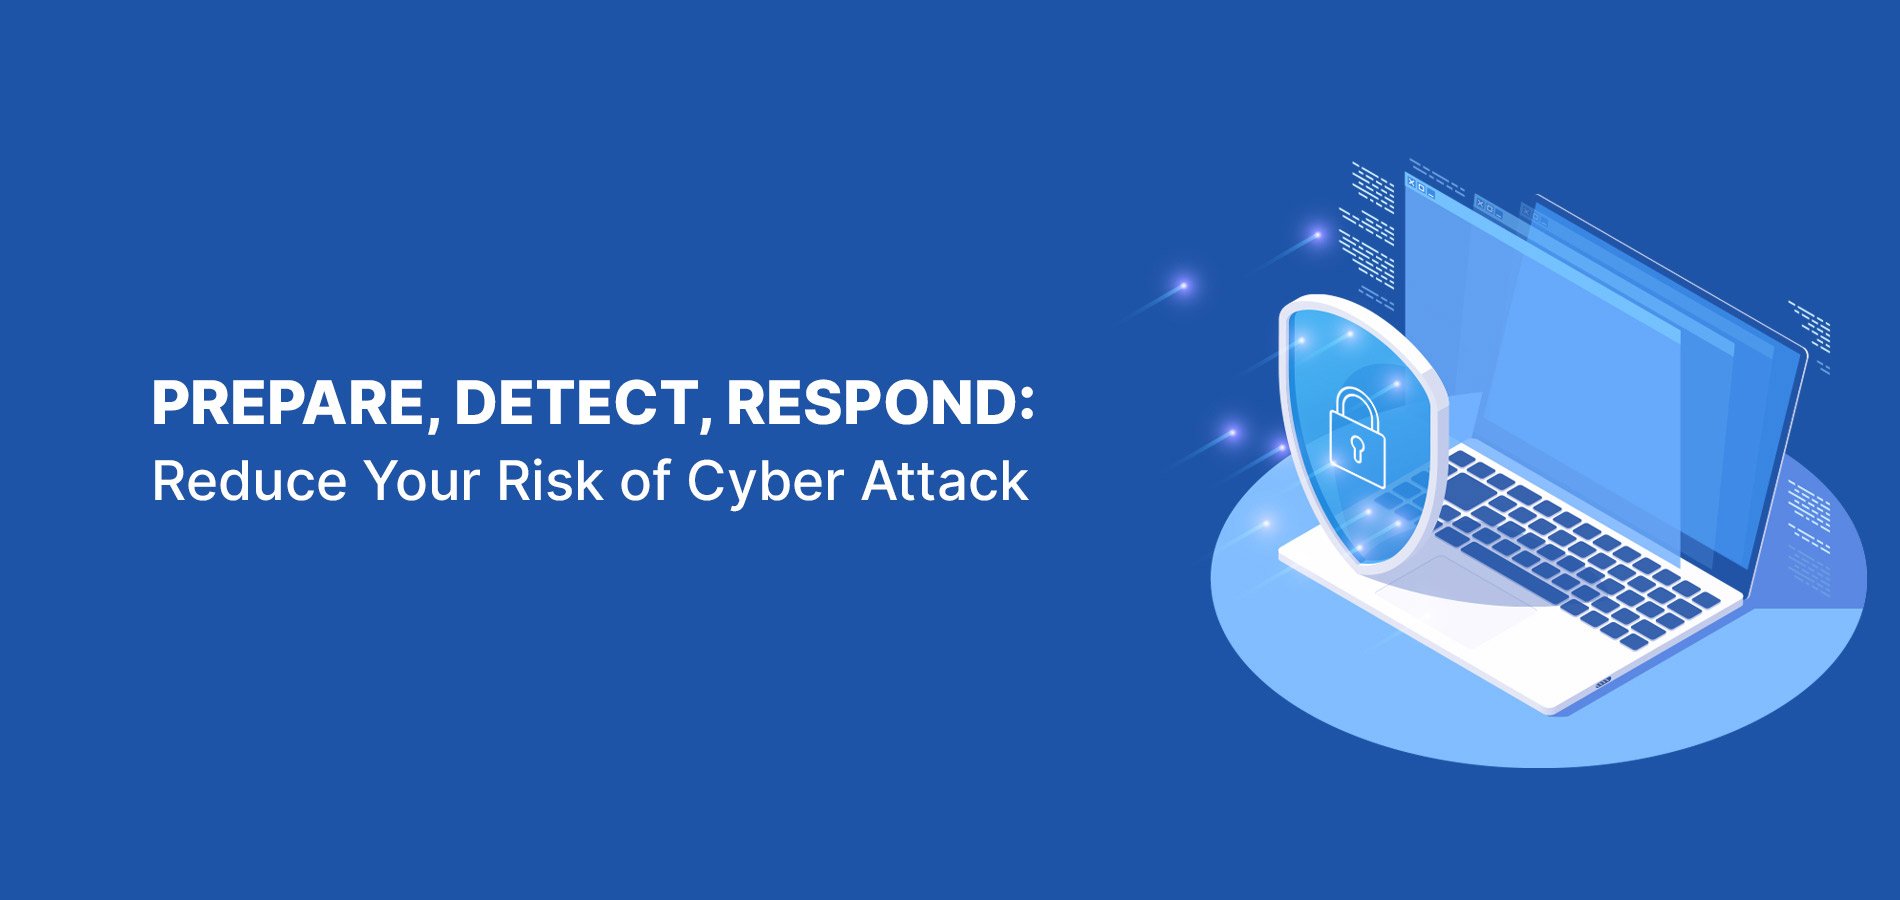 Prepare, Detect, Respond: Reduce Your Risk of Cyber Attack with Attack Surface Intelligence.